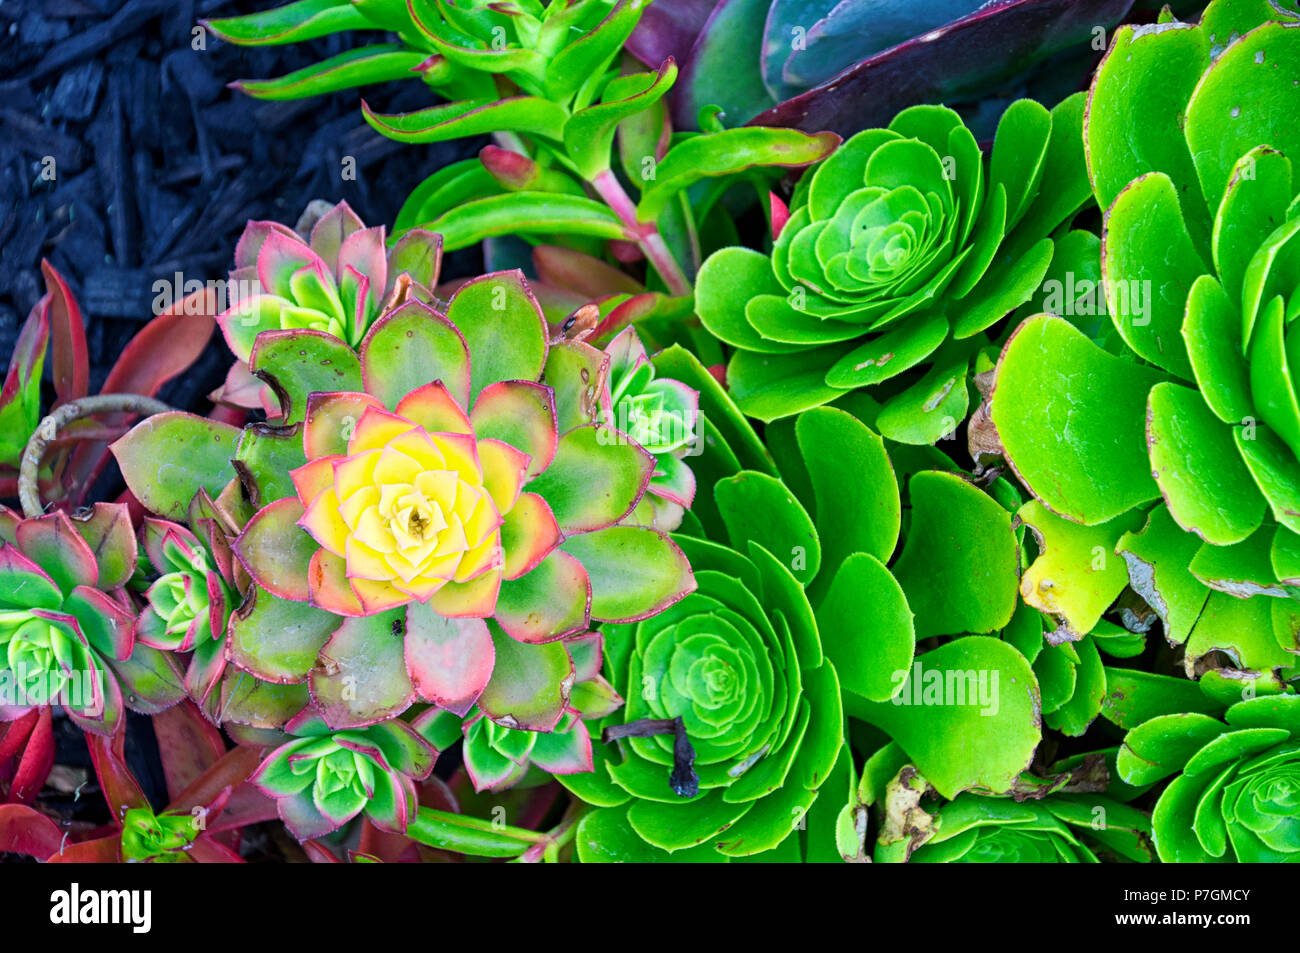 A variety of colorful hens and chicks succulent plants in a garden at the hollywood forever cemetery in Los Angeles California. Stock Photo